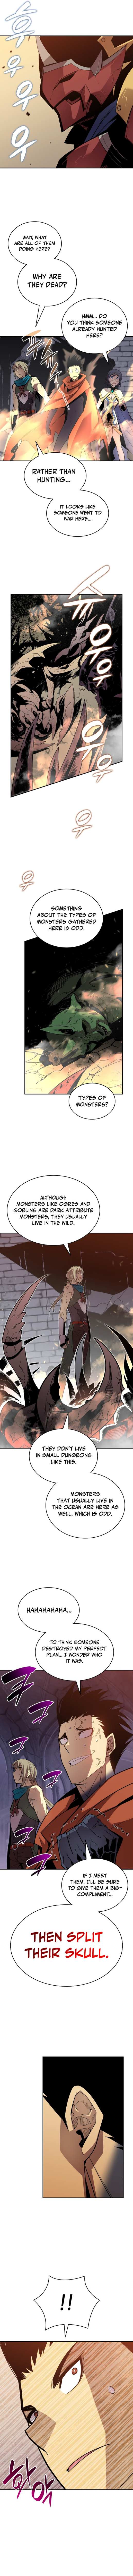 Worn and Torn Newbie - Chapter 138 Page 5